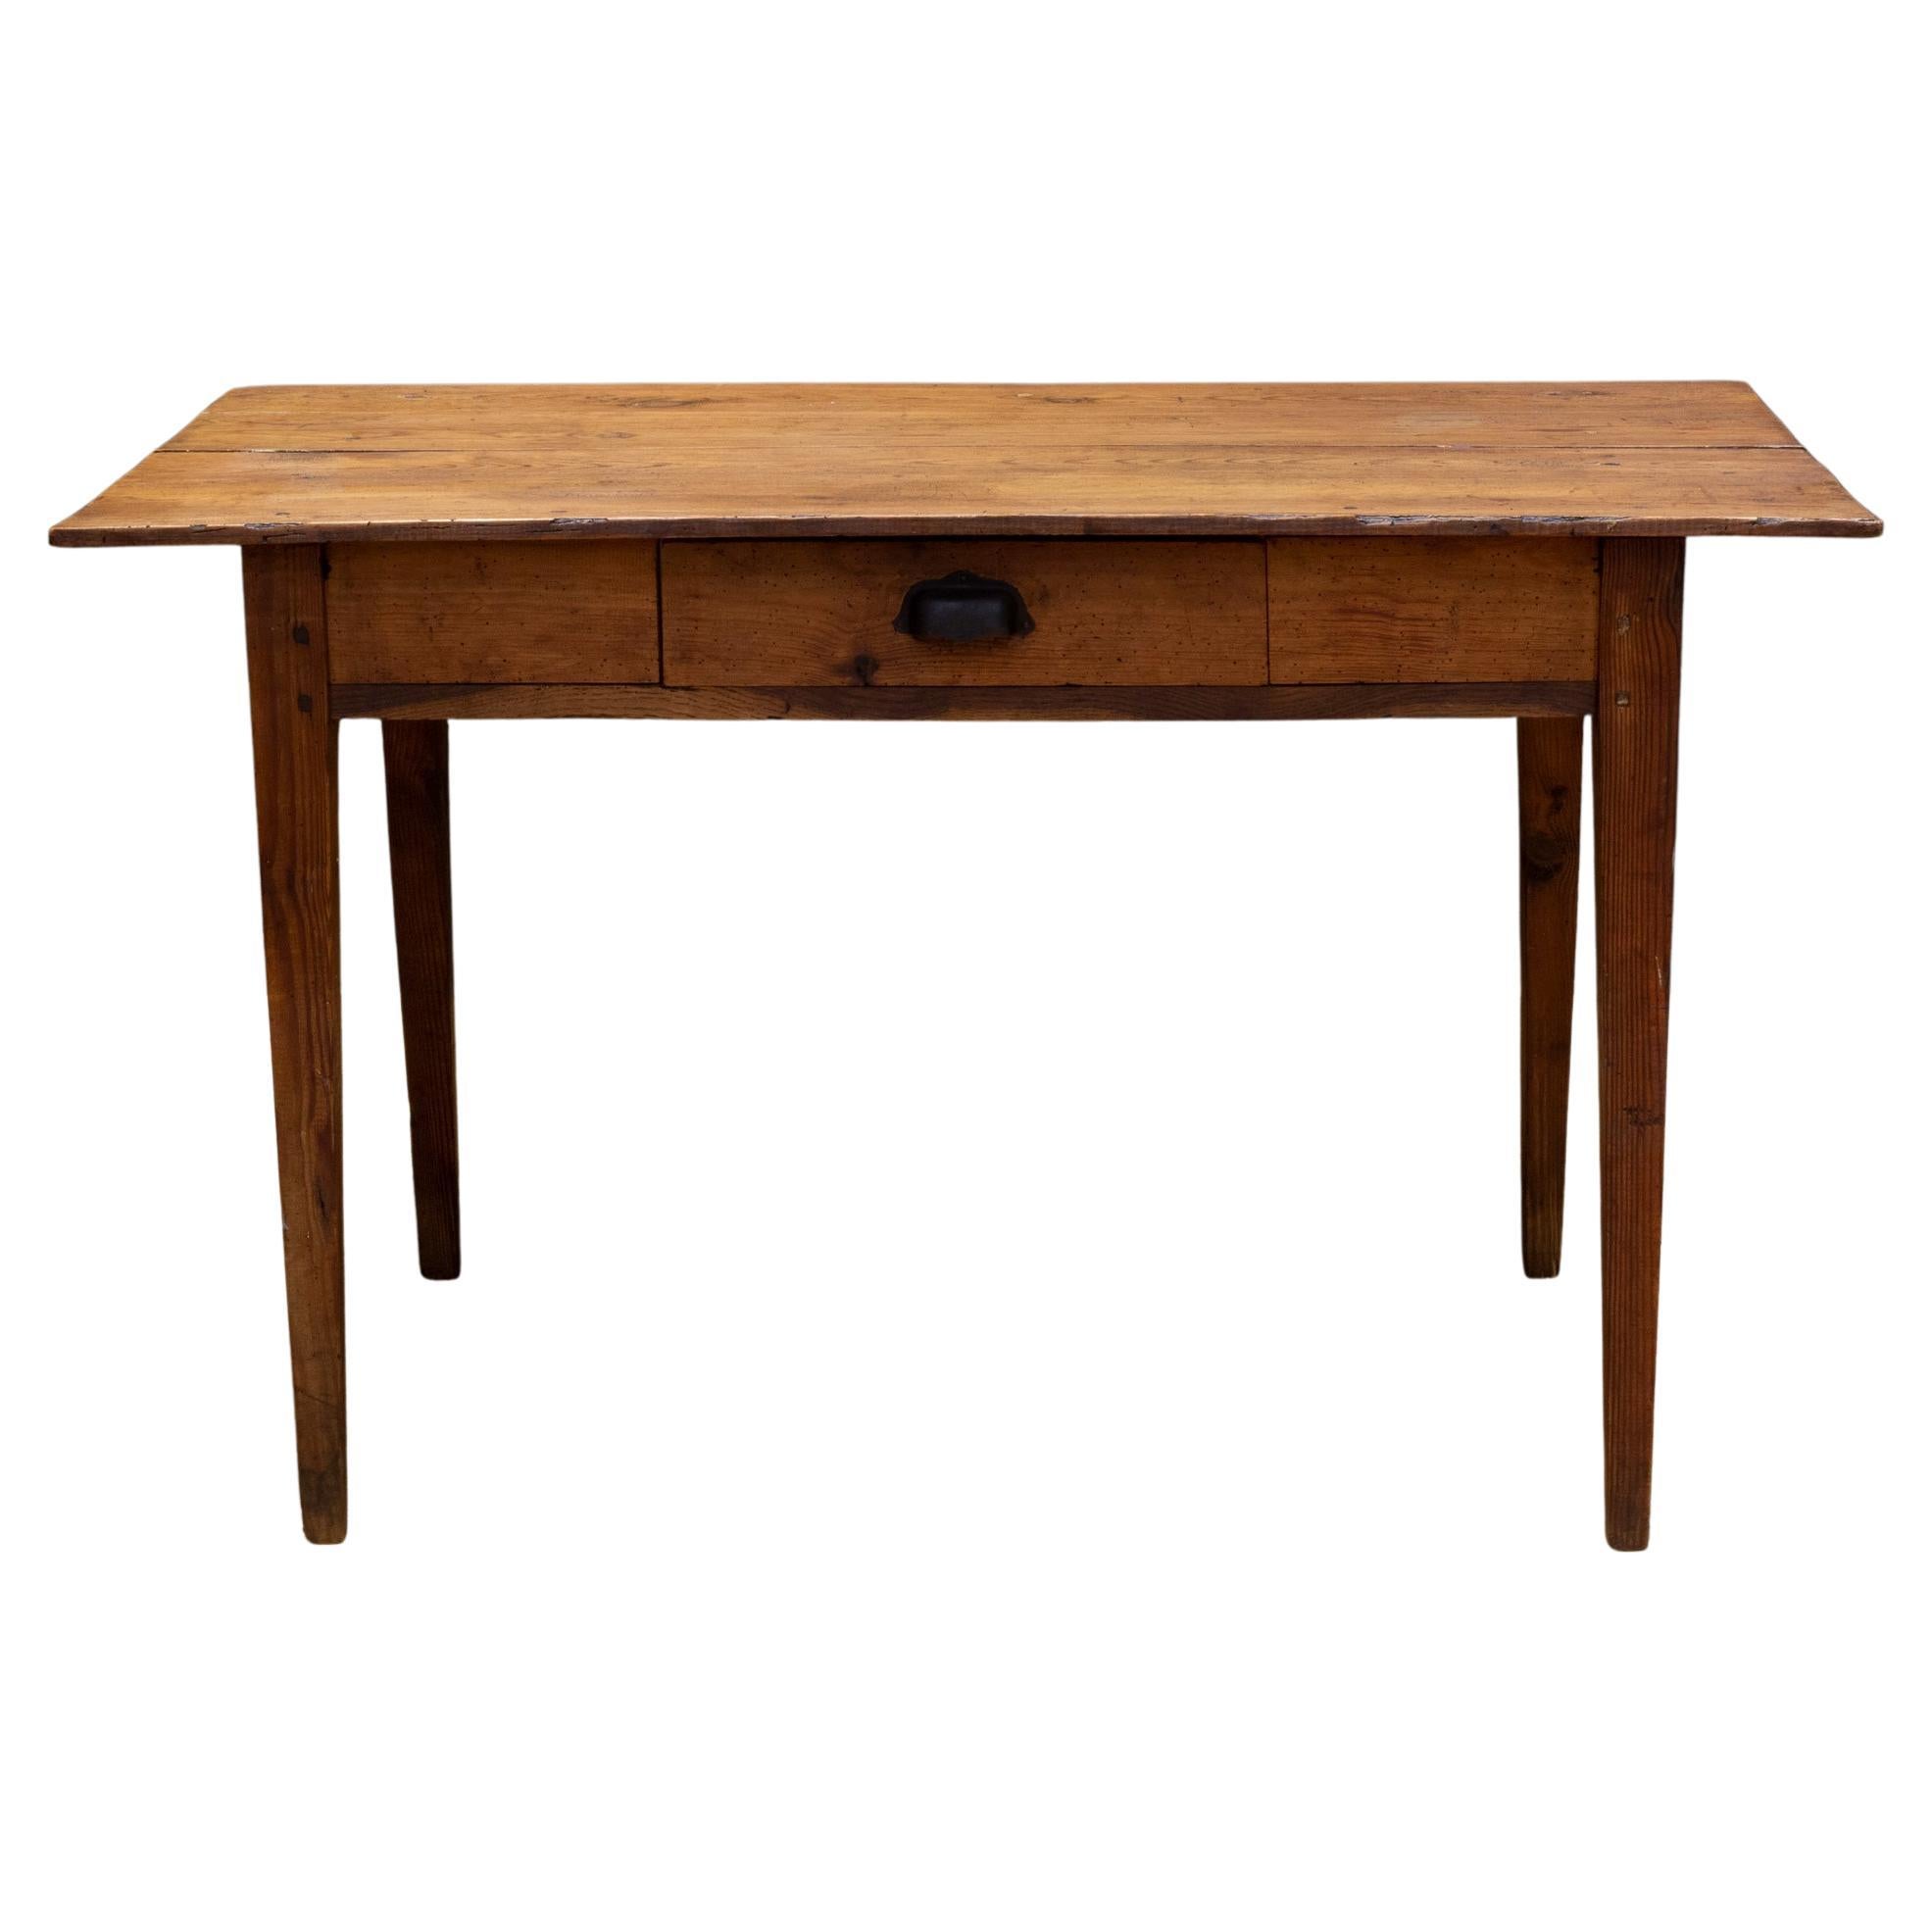 19th c. Rustic French Farmhouse Table c.1850-1900 For Sale